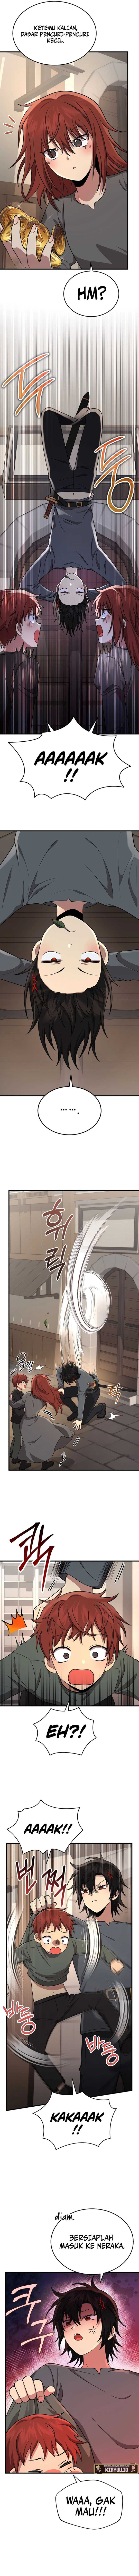 Heir of Mythical Heroes Chapter 36